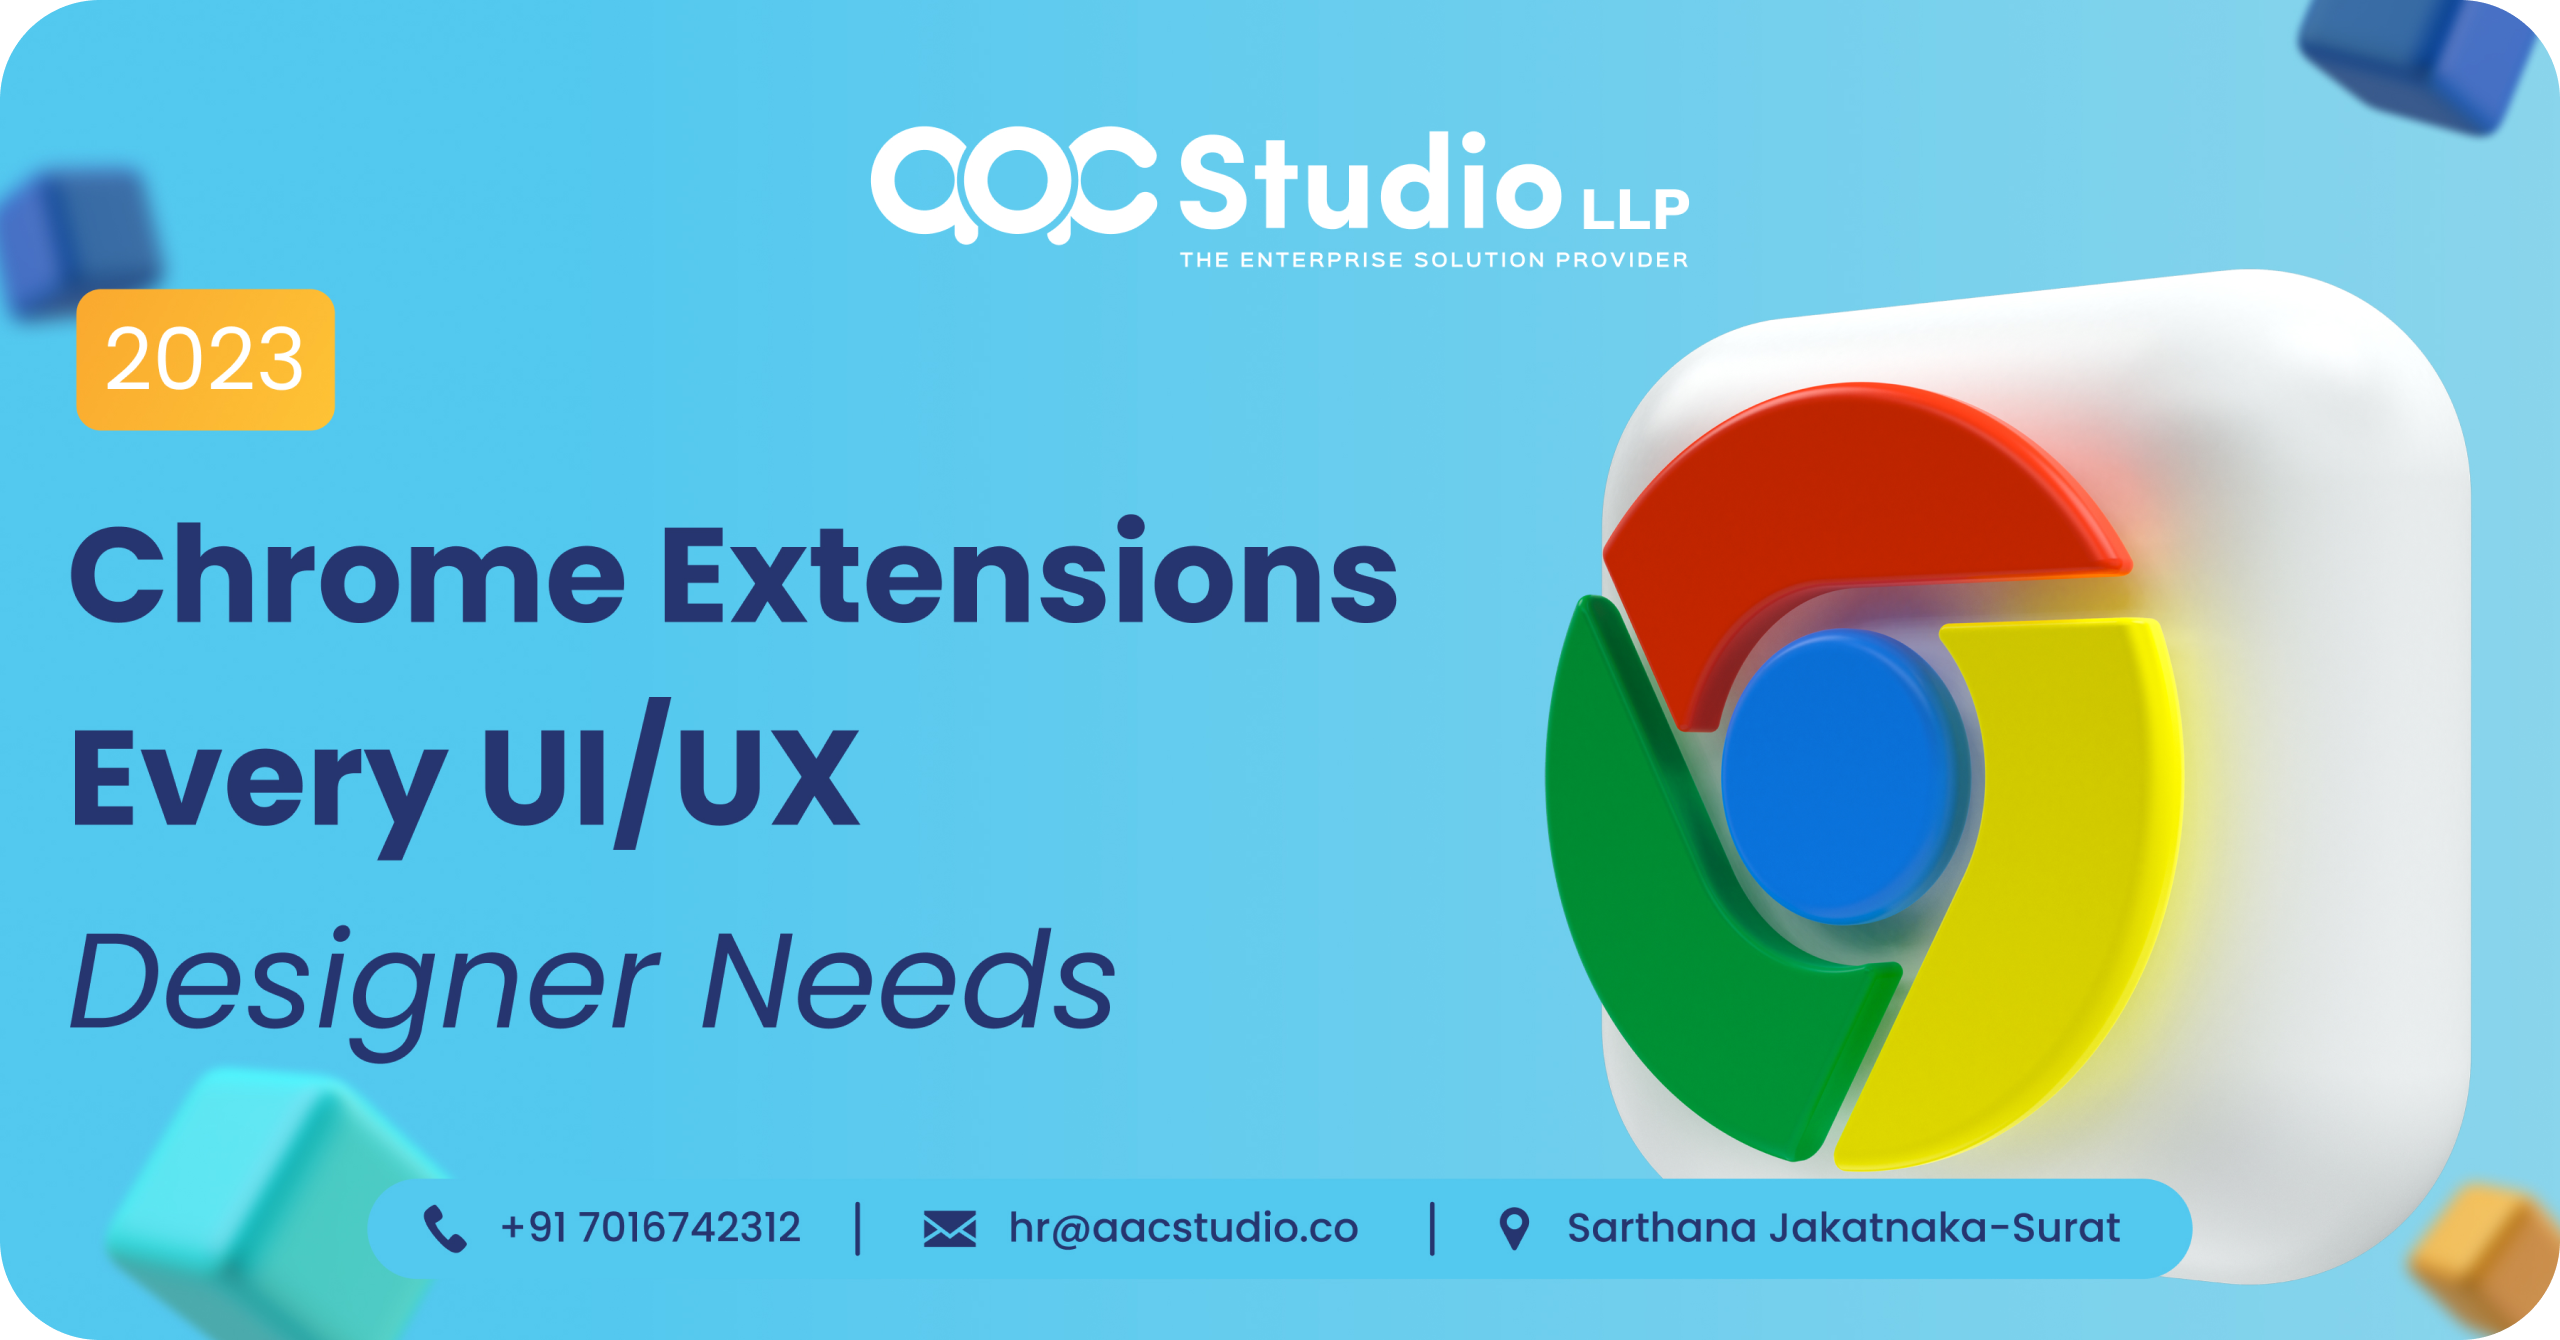 Chrome Extensions Every UI/UX Designer Needs In 2023